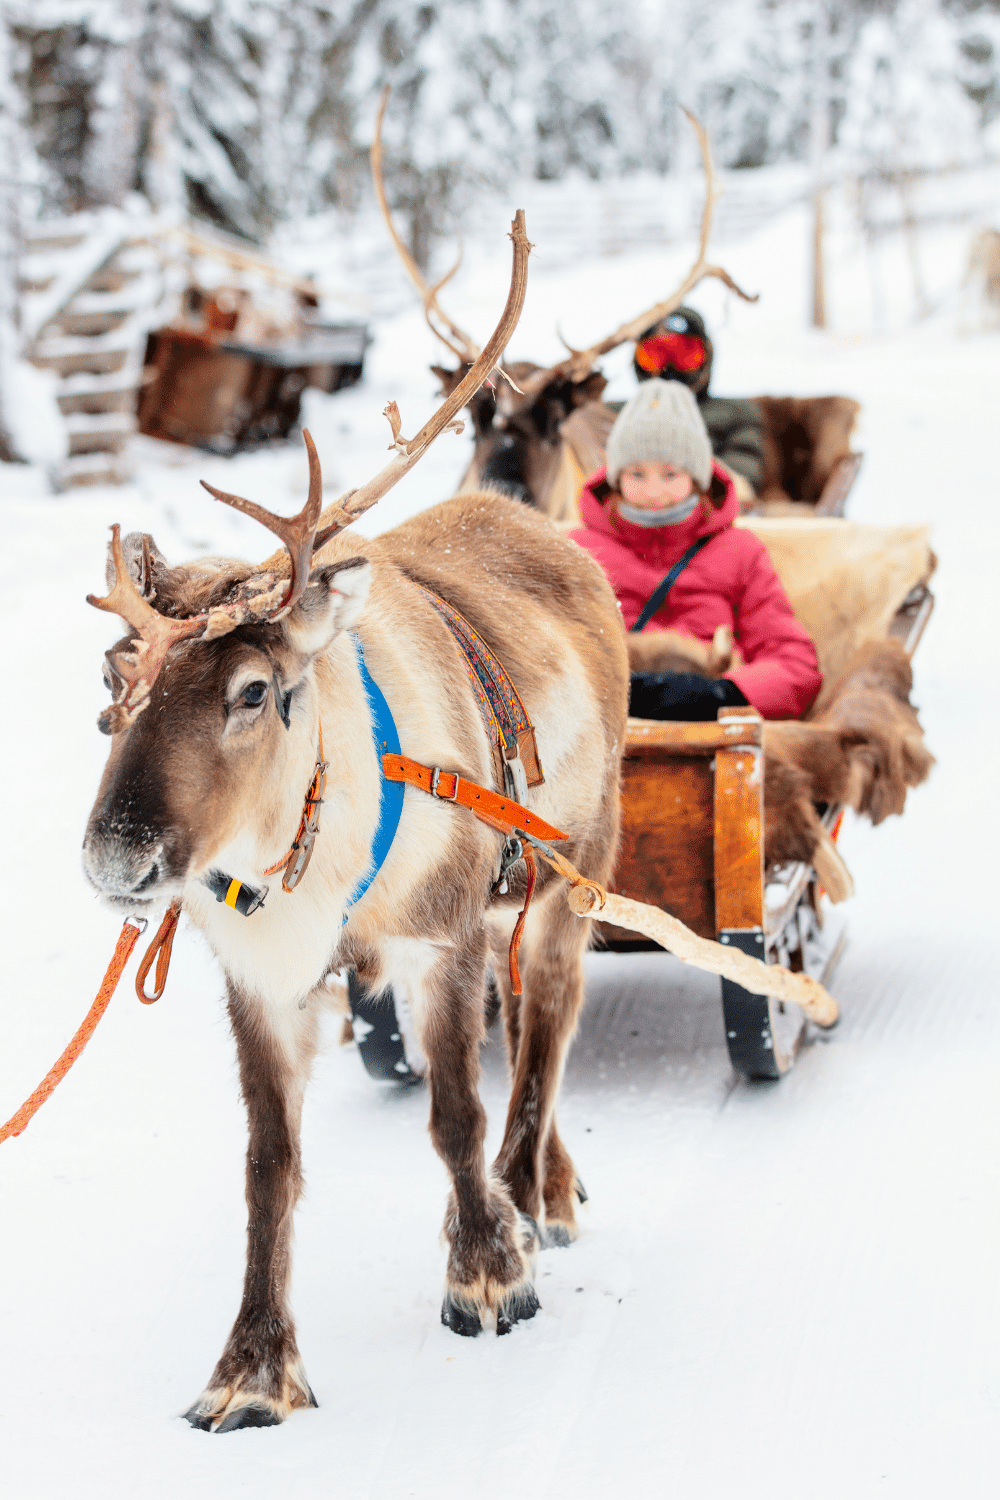 Reindeer Sledding Since Reindeer Back Half is not Designed to Support the Weight of a Person